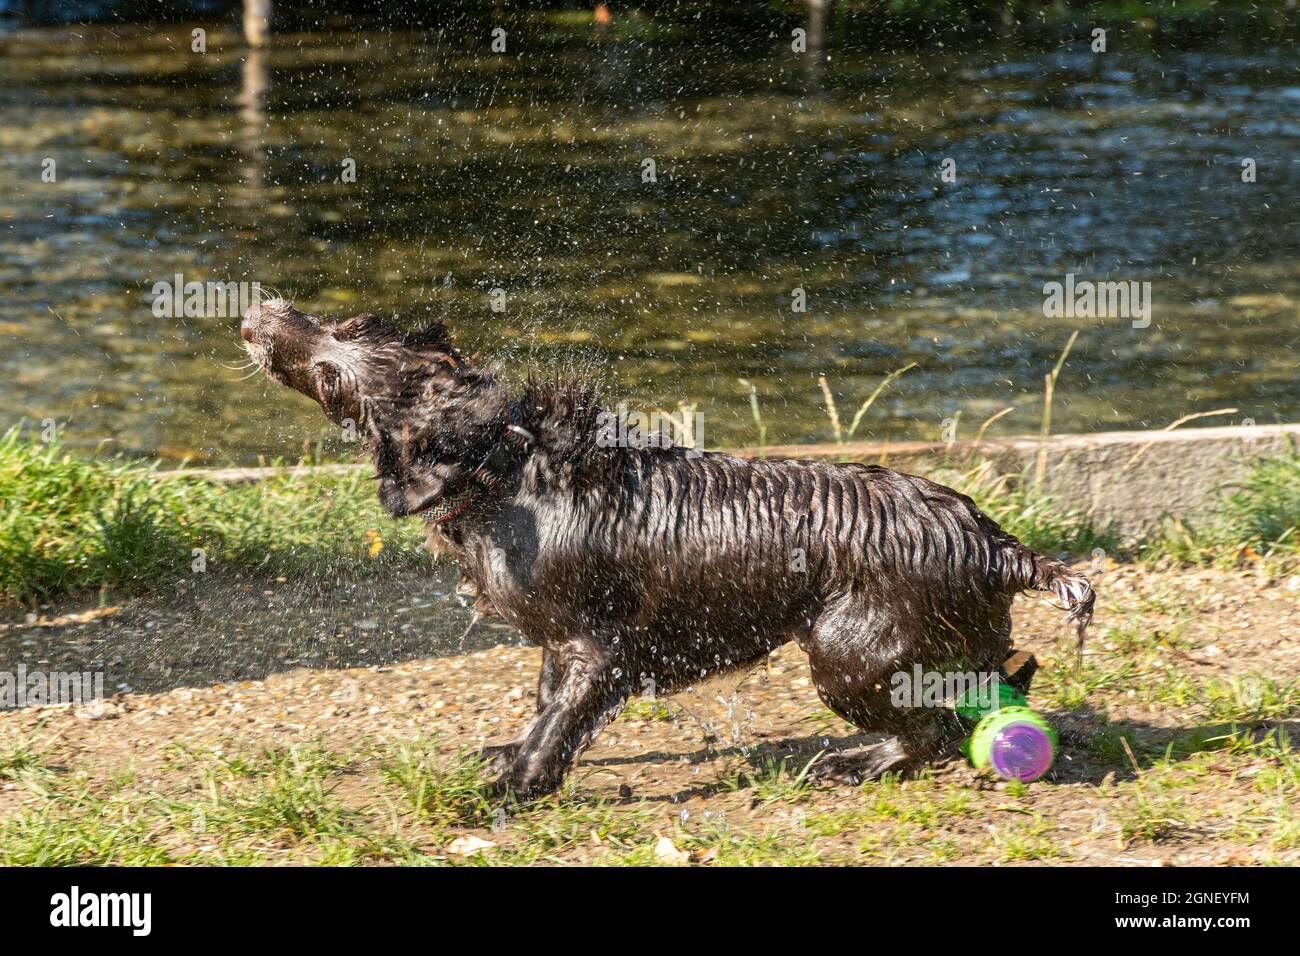 A dog shaking itself dry after swimming in a river, UK Stock Photo